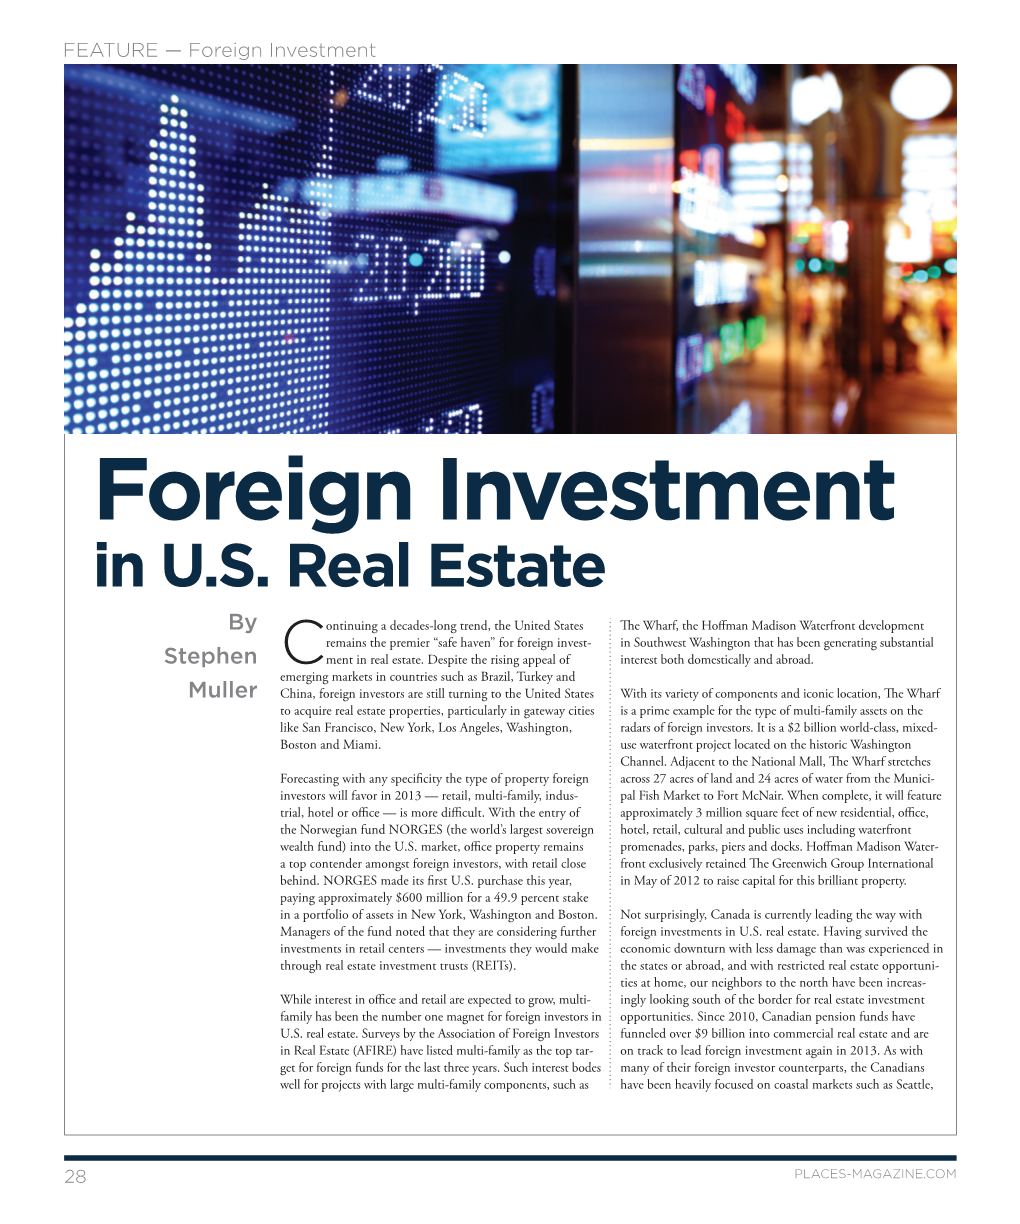 Foreign Investment in U.S. Real Estate by Stephen Muller